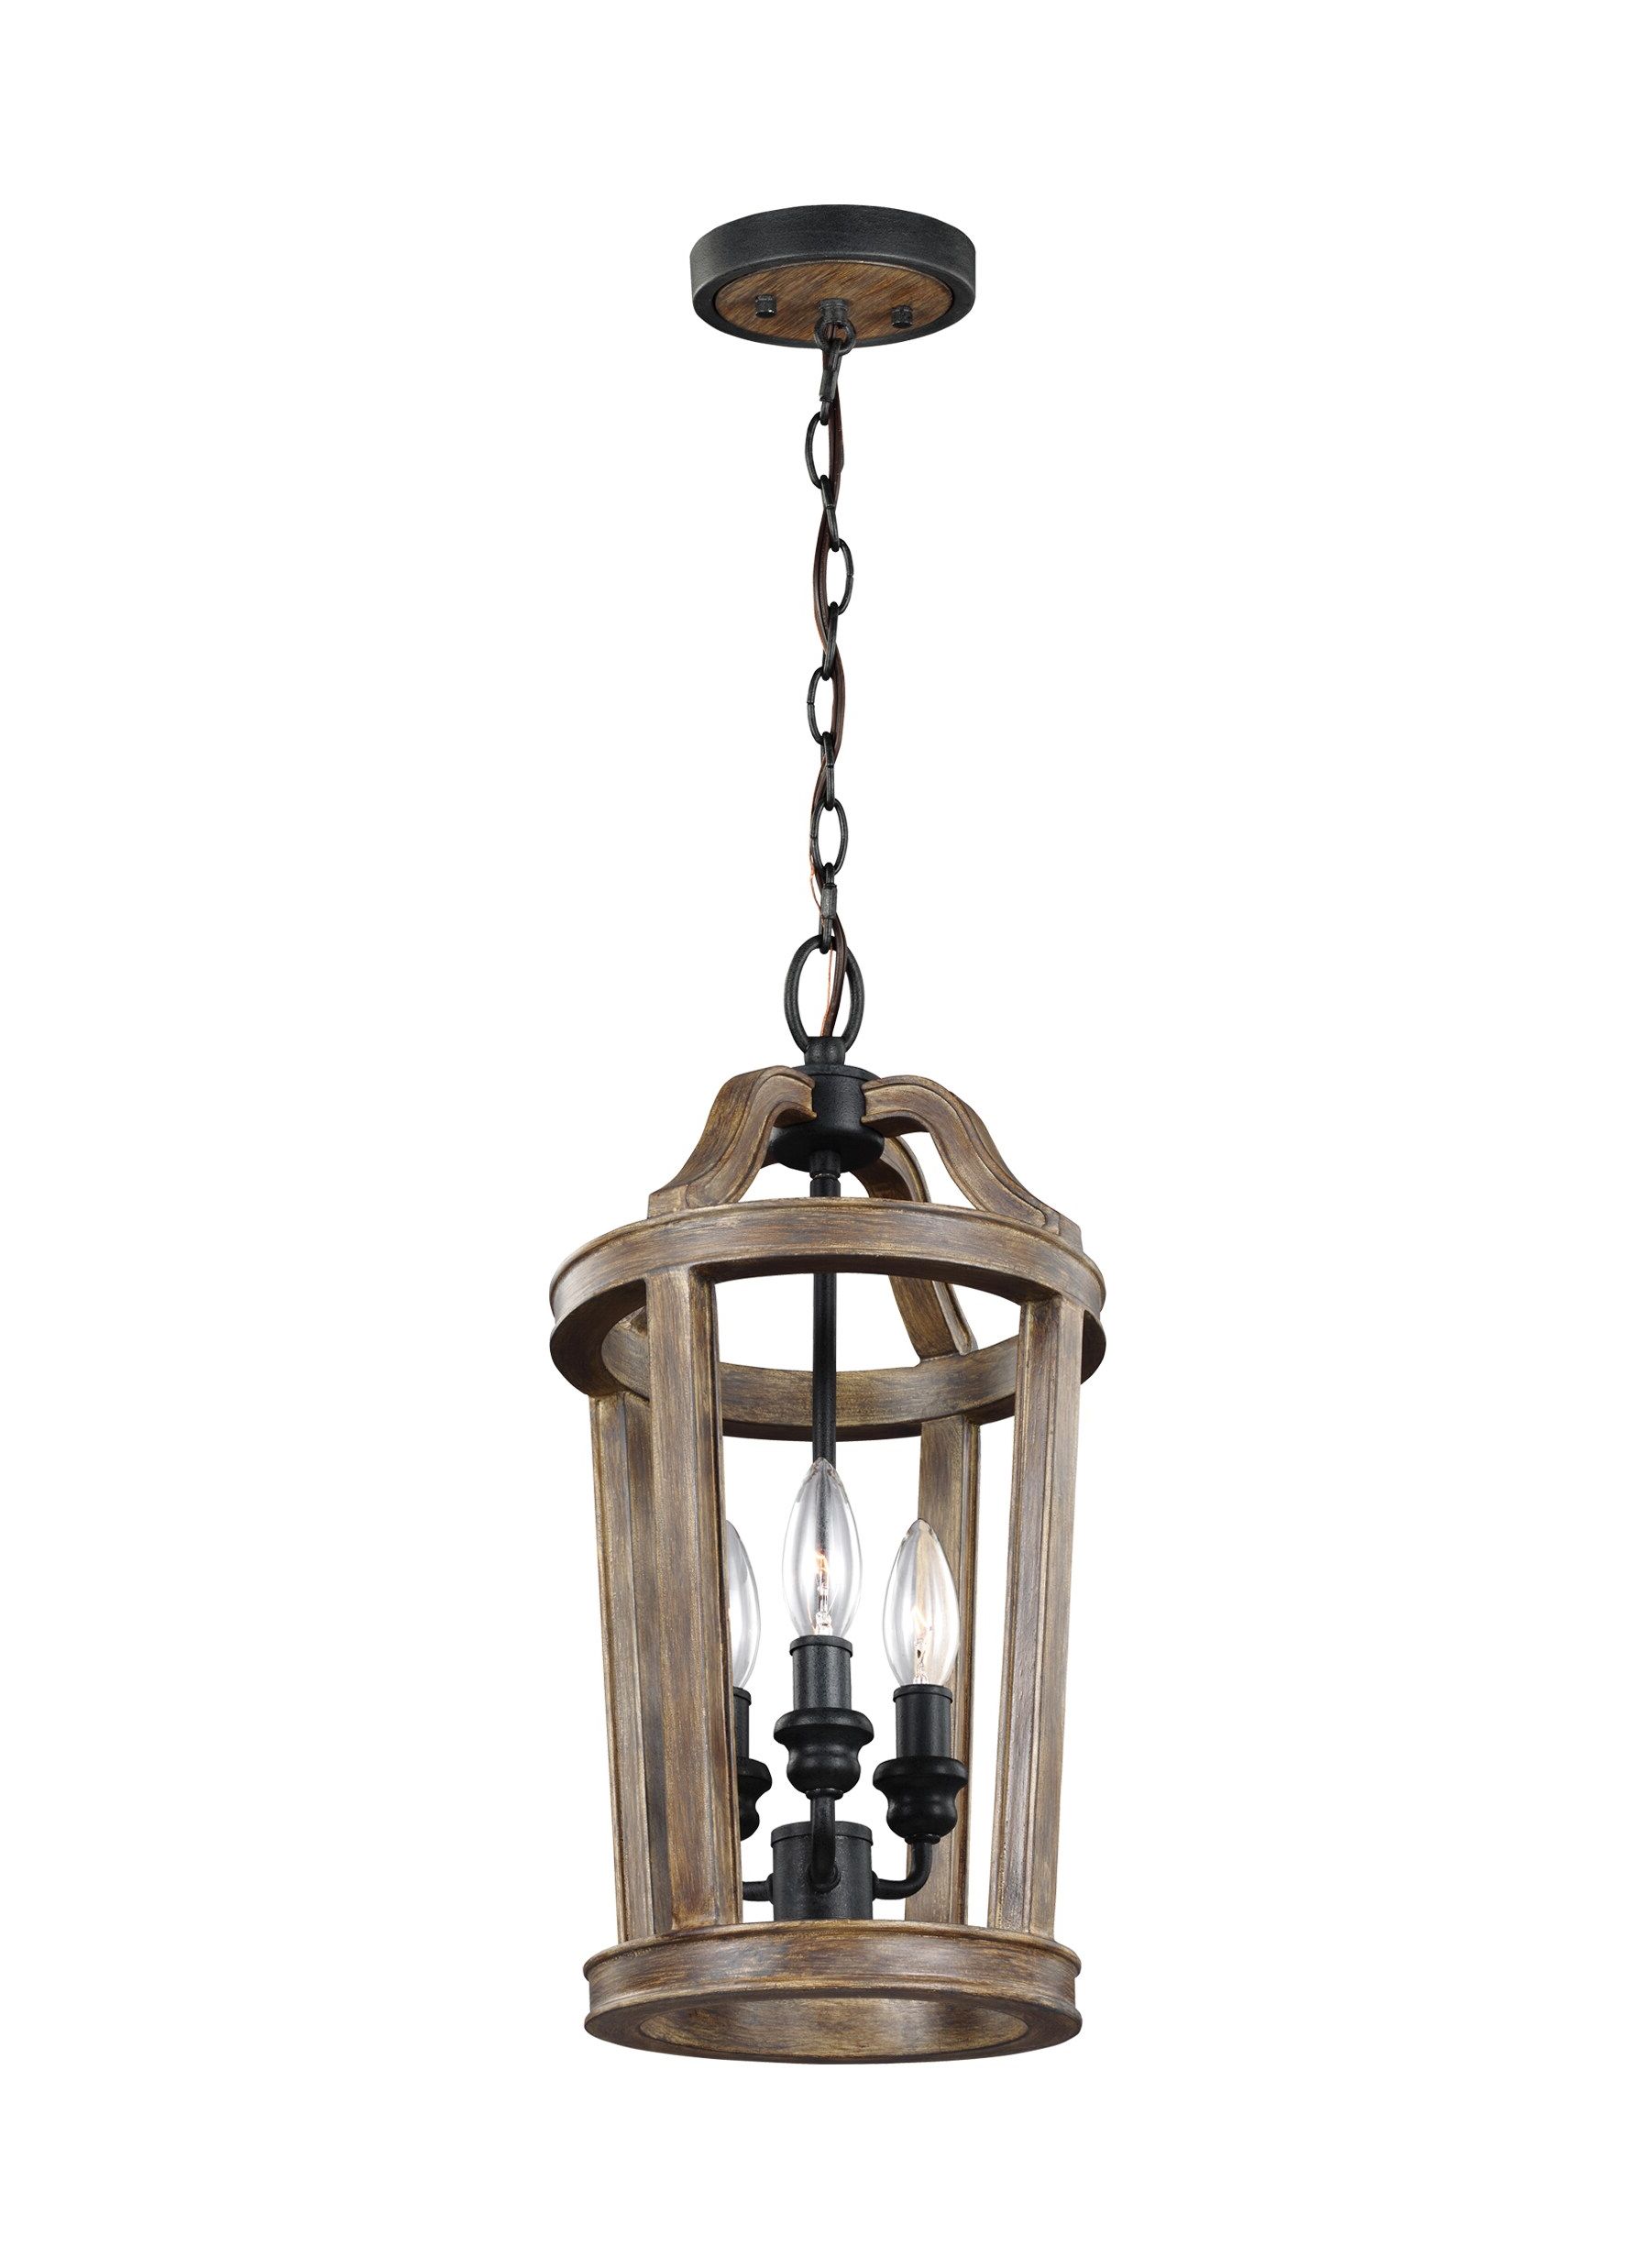 Most Popular Feiss Lorenz 3 Light Weathered Oak Wood Transitional Lantern Pendant Light  In The Pendant Lighting Department At Lowes Inside Weathered Oak Wood Lantern Chandeliers (View 5 of 15)